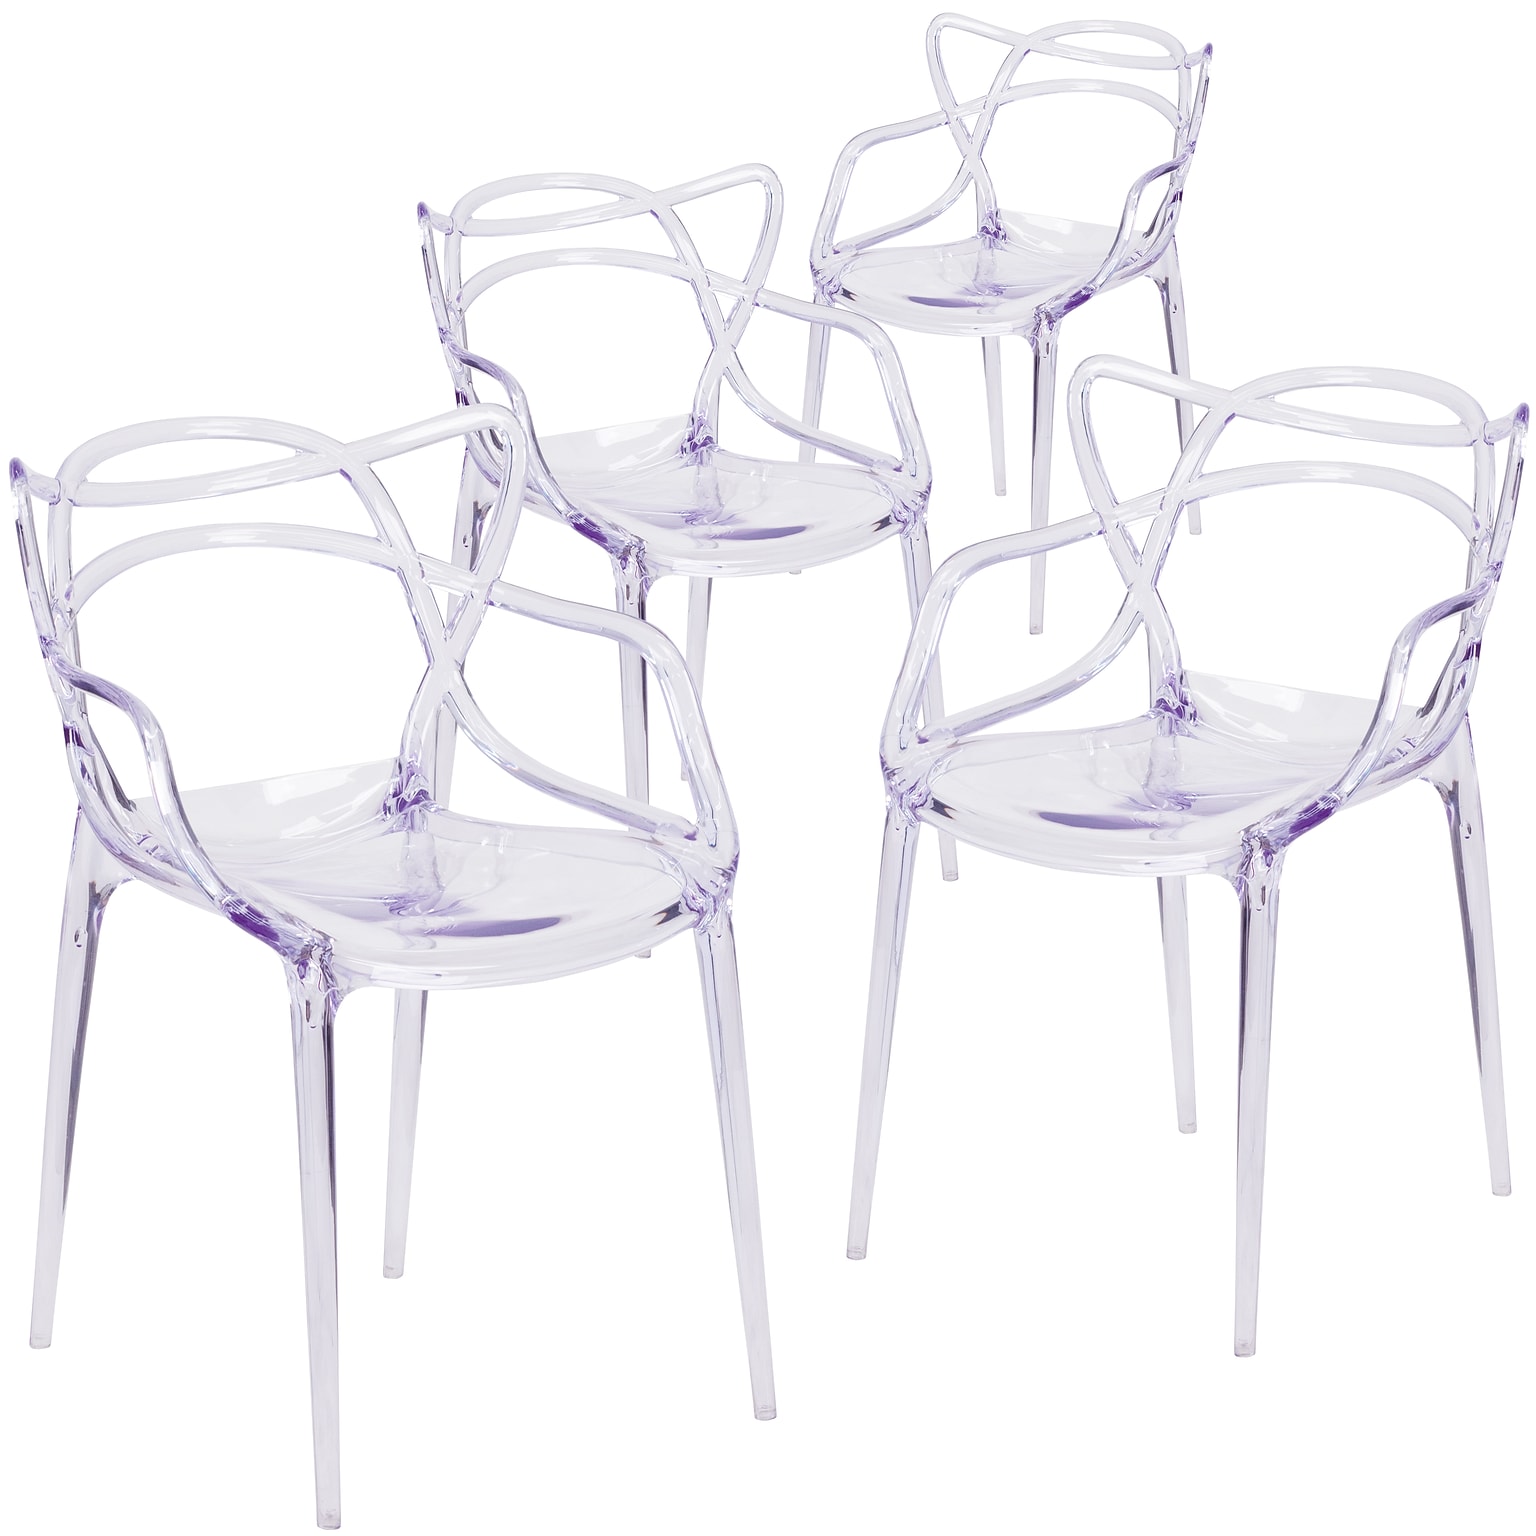 Flash Furniture Nesting Series Plastic Side Chair, Clear, 4 Pack (4FH173APC)